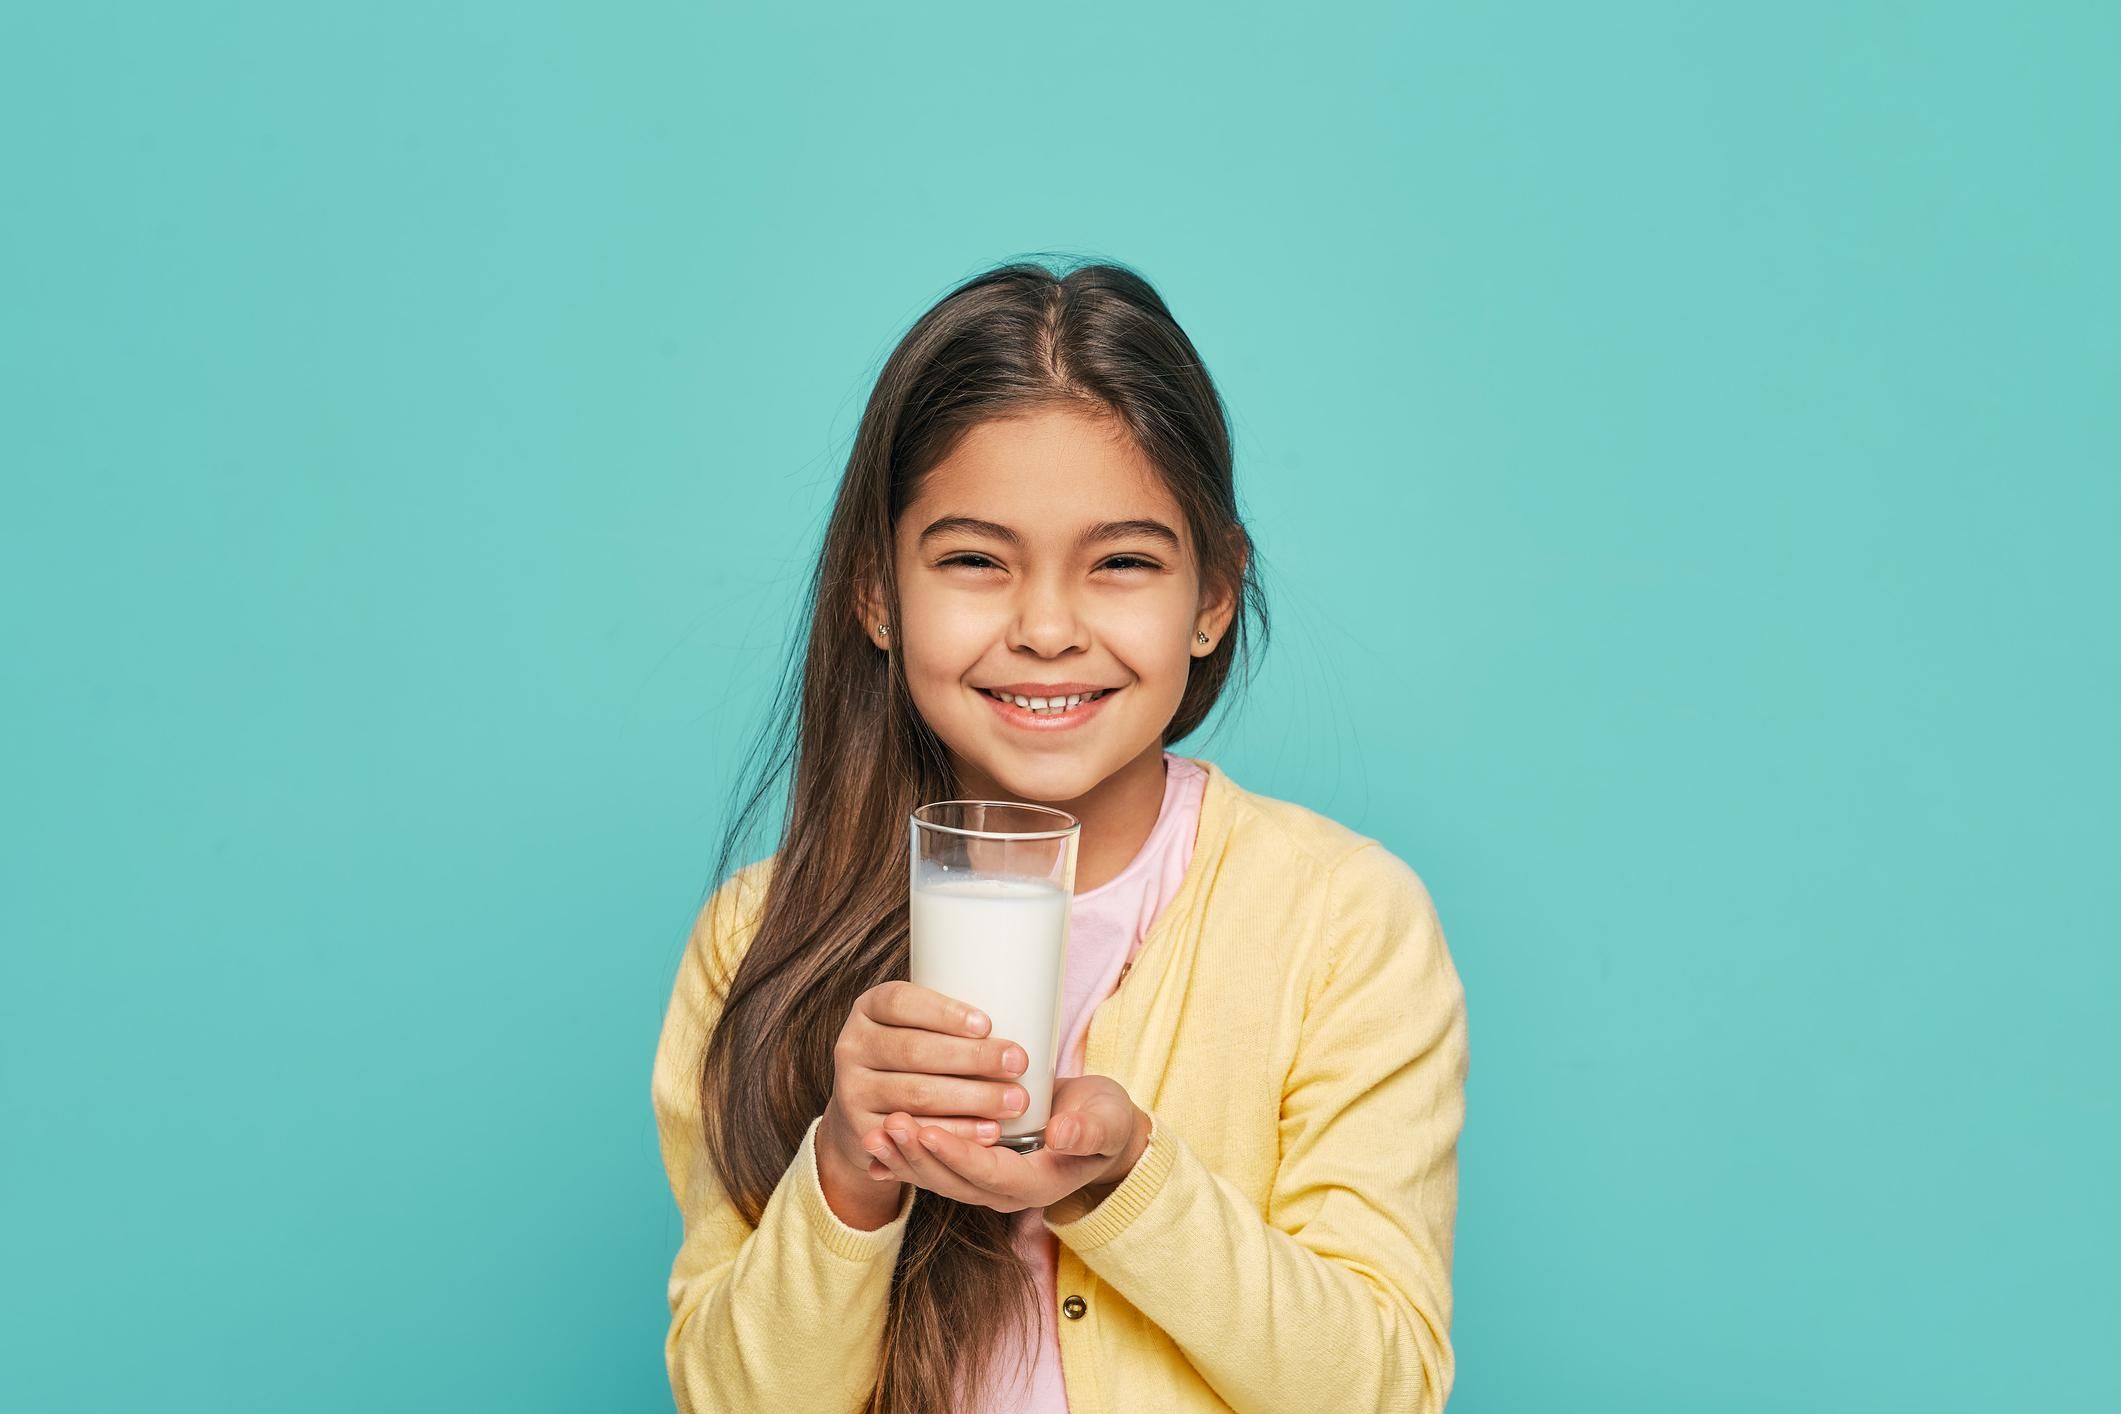 Portrait mixed race female kid with a glass of milk in her hands